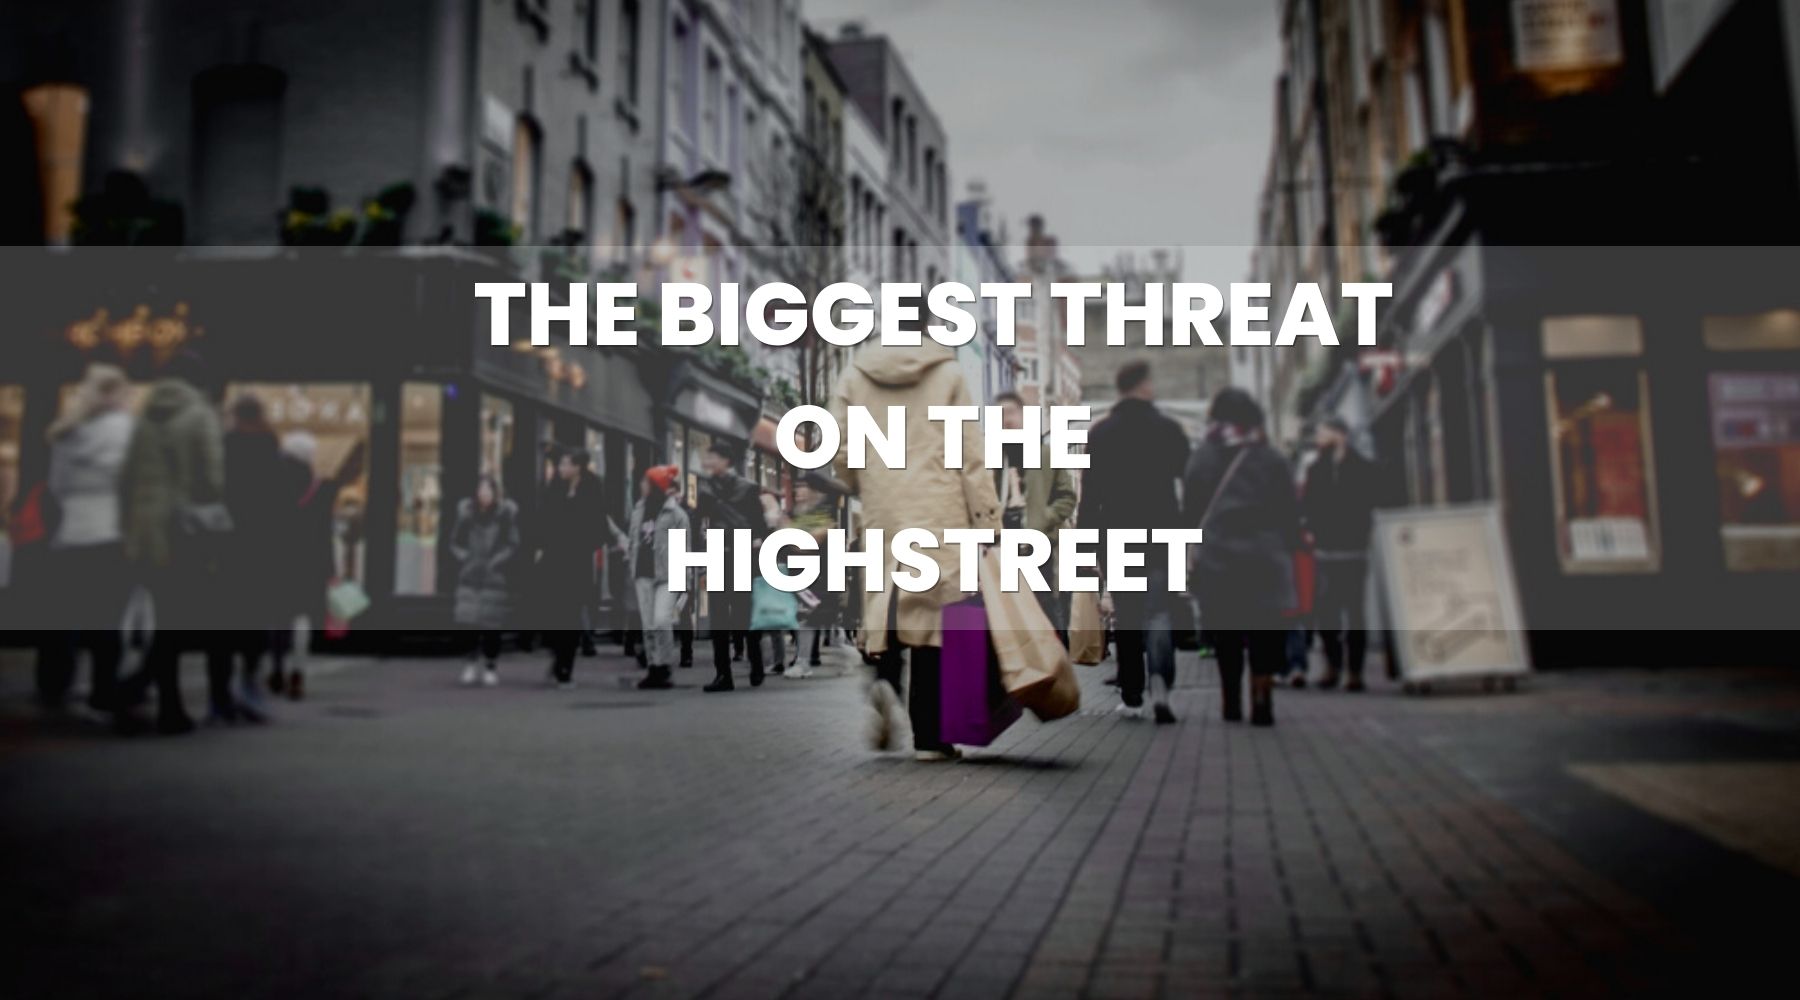 trading-standards-point-to--illagal-vapes-as-the-biggest-threat-on-the-highstreet